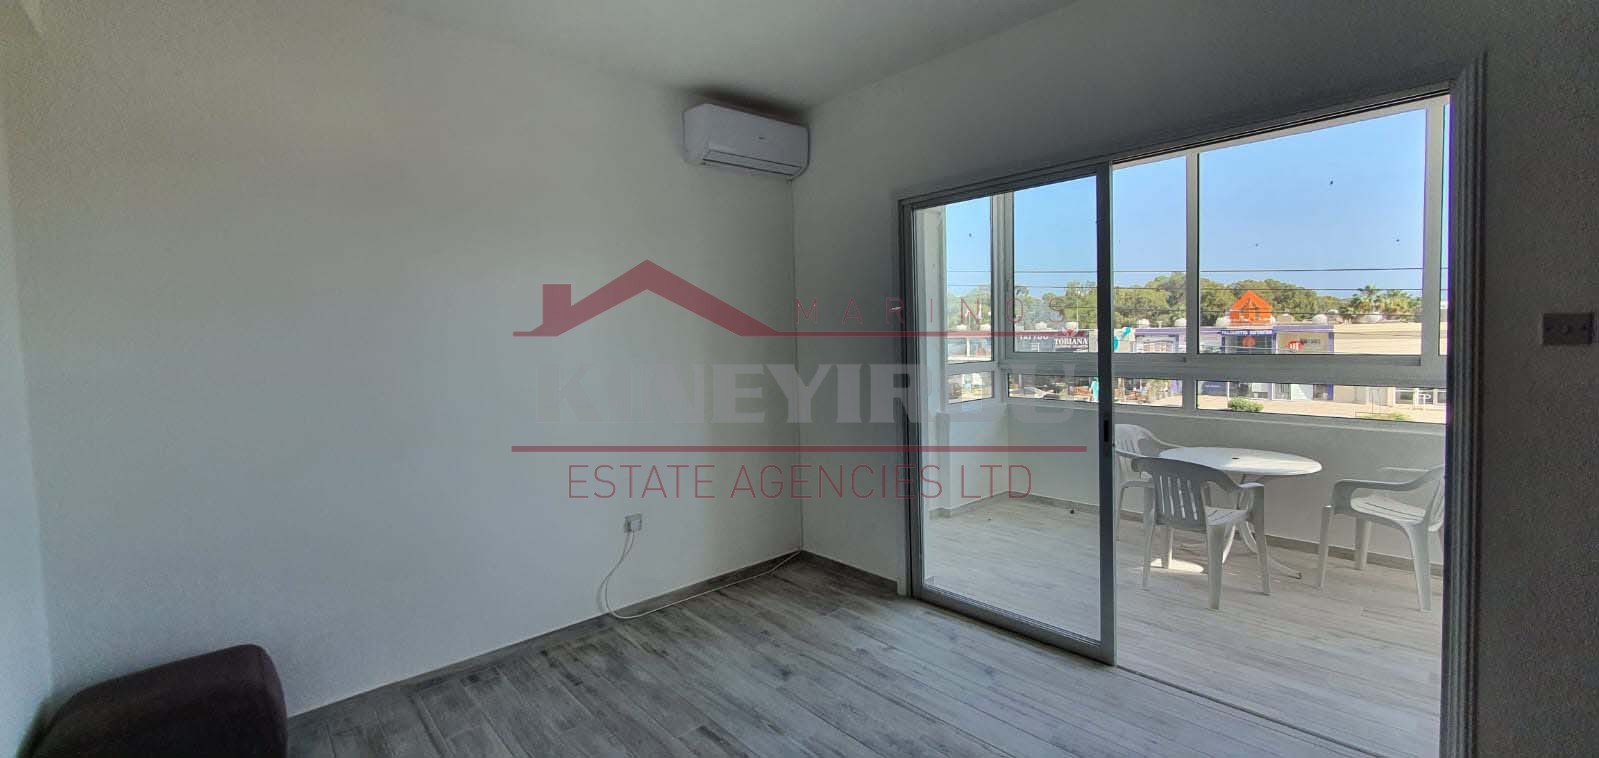 Fully renovated 2 Bedroom Penthouse with sea view in Touristic Pyla, Larnaca.